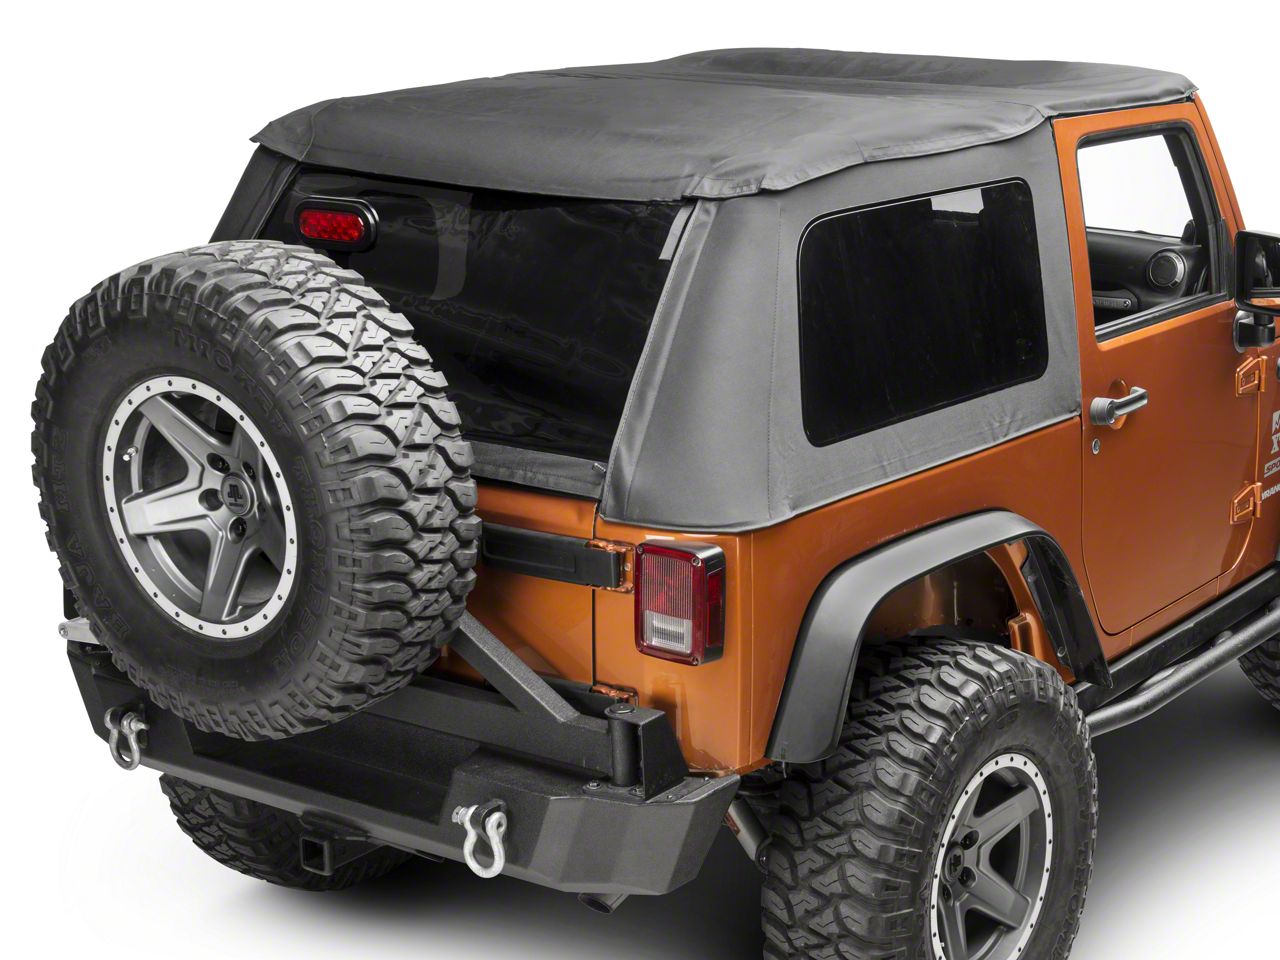 Smittybilt Jeep Wrangler Bowless Combo Soft Top with Tinted